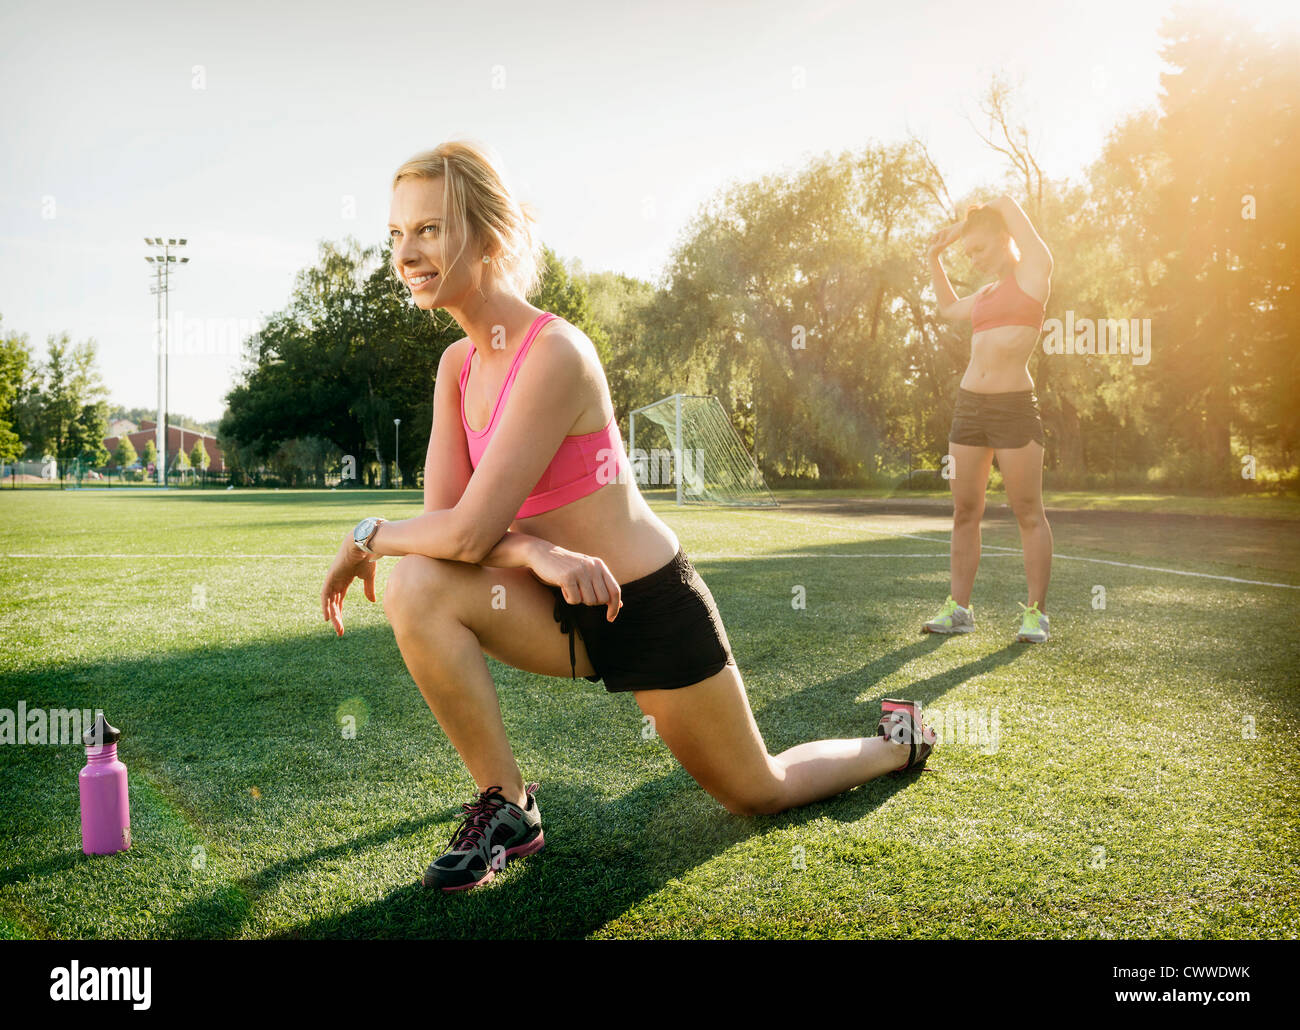 Runners stretching on grass in park Stock Photo